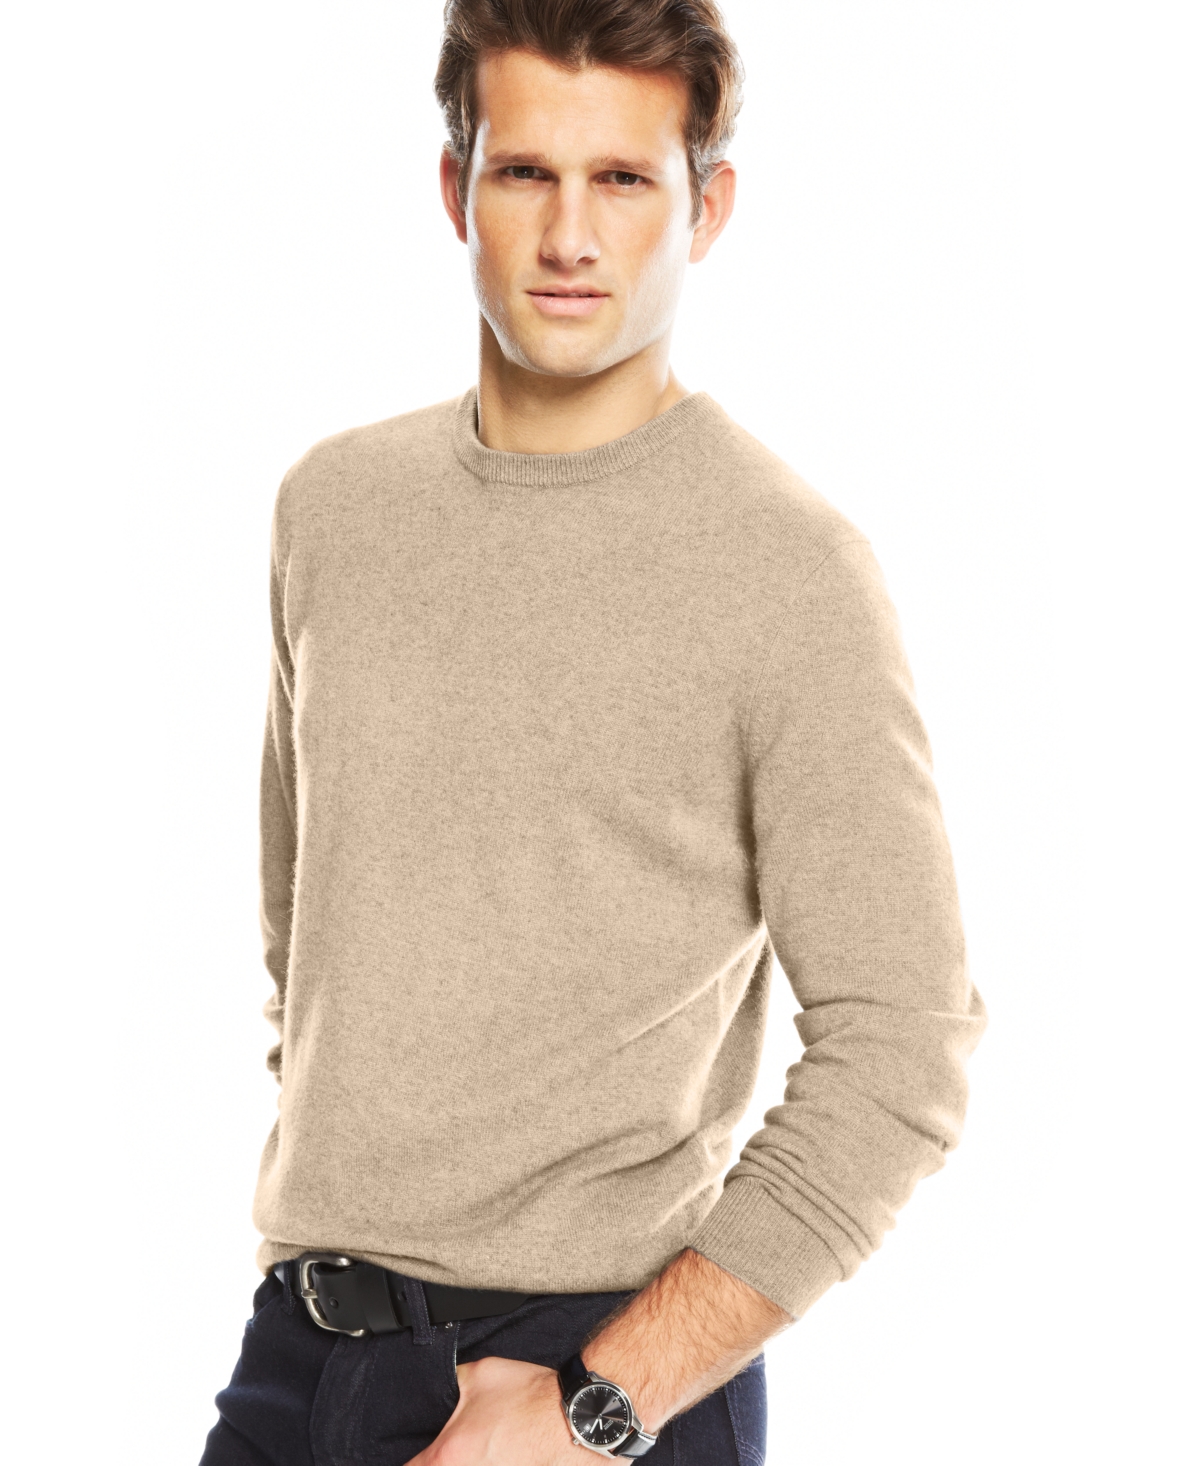 Cashmere Crew-Neck Sweater, Created for Macy's - Oatmeal Heather